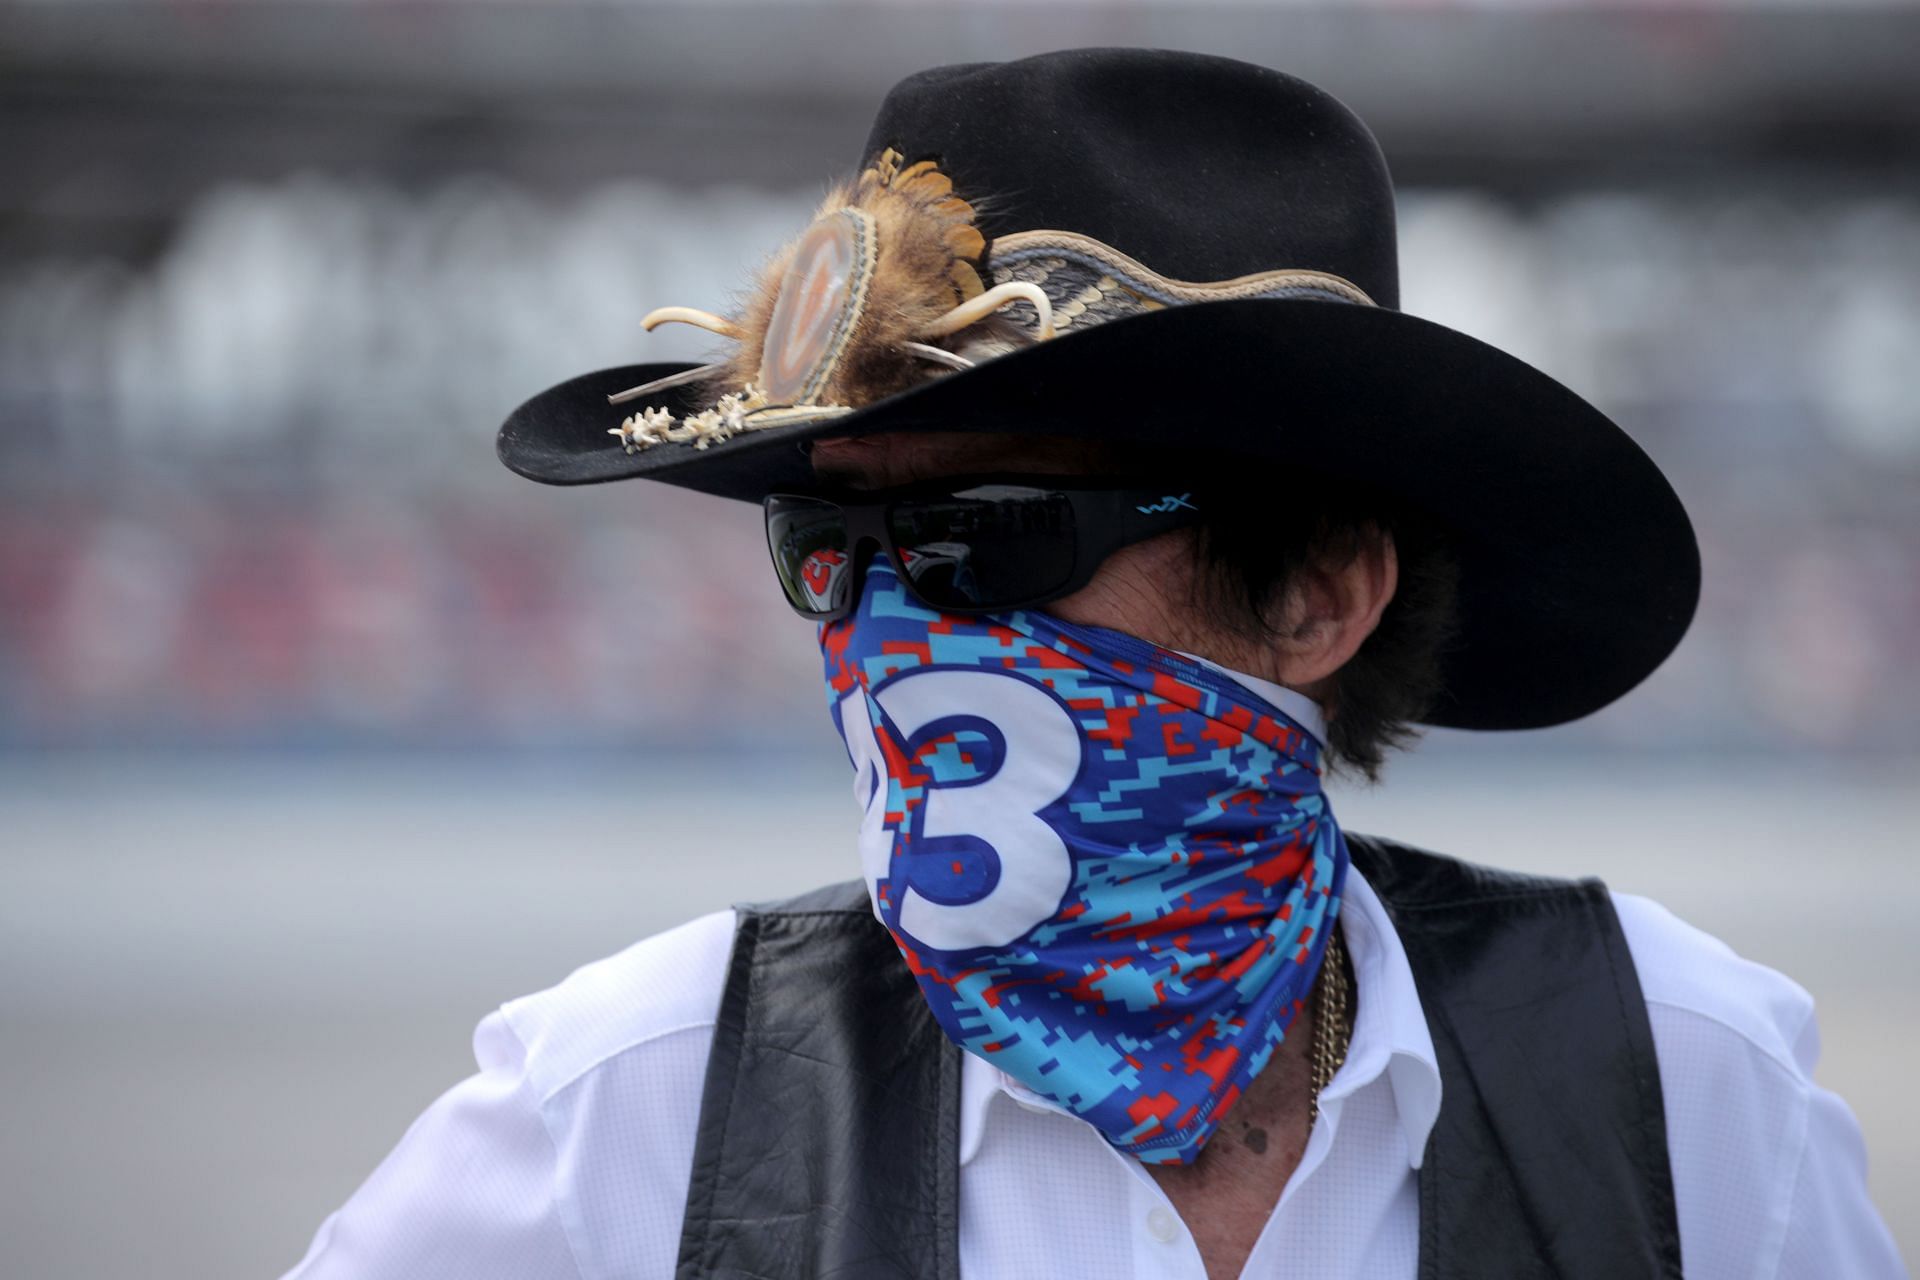 Hall of Famer Richard Petty stands on the grid prior to the NASCAR Cup Series GEICO 500 at Talladega Superspeedway.